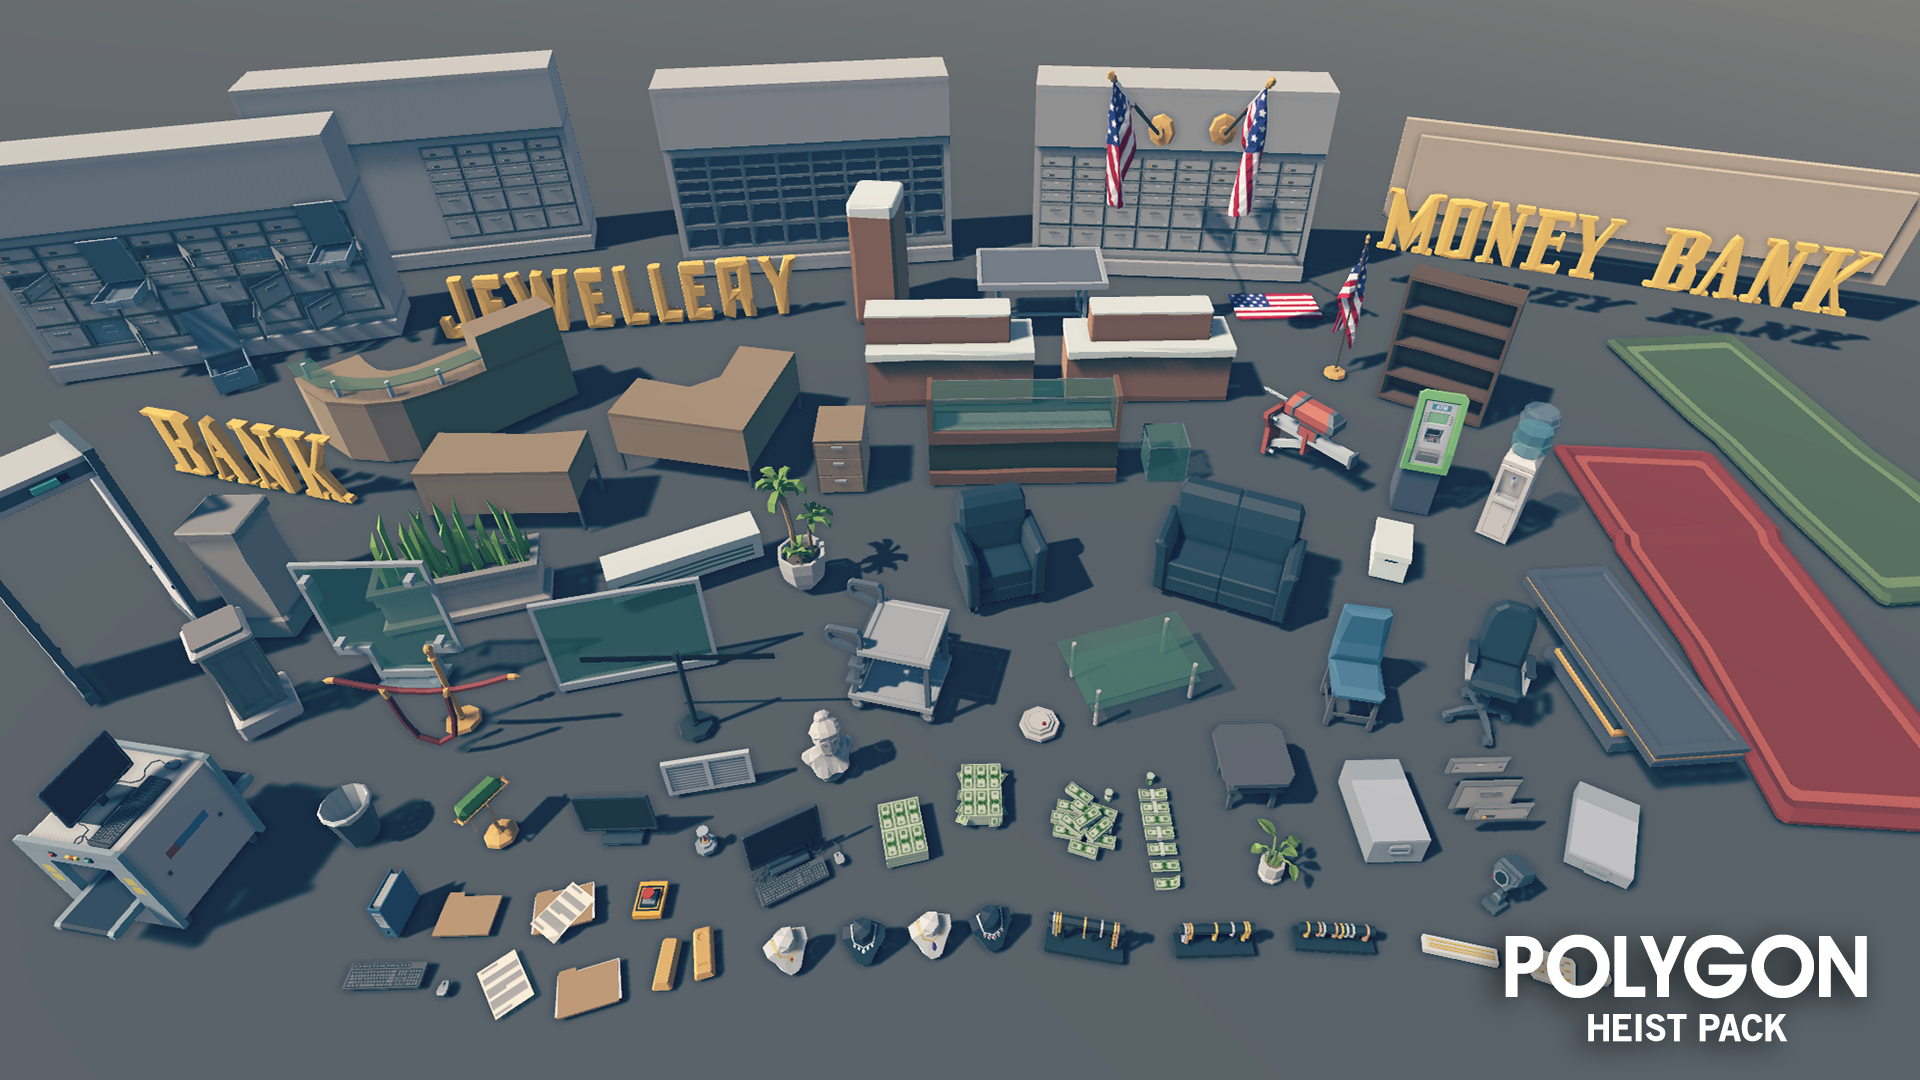 POLYGON - Heist Pack - Synty Studios - Unity and Unreal 3D low poly assets for game development